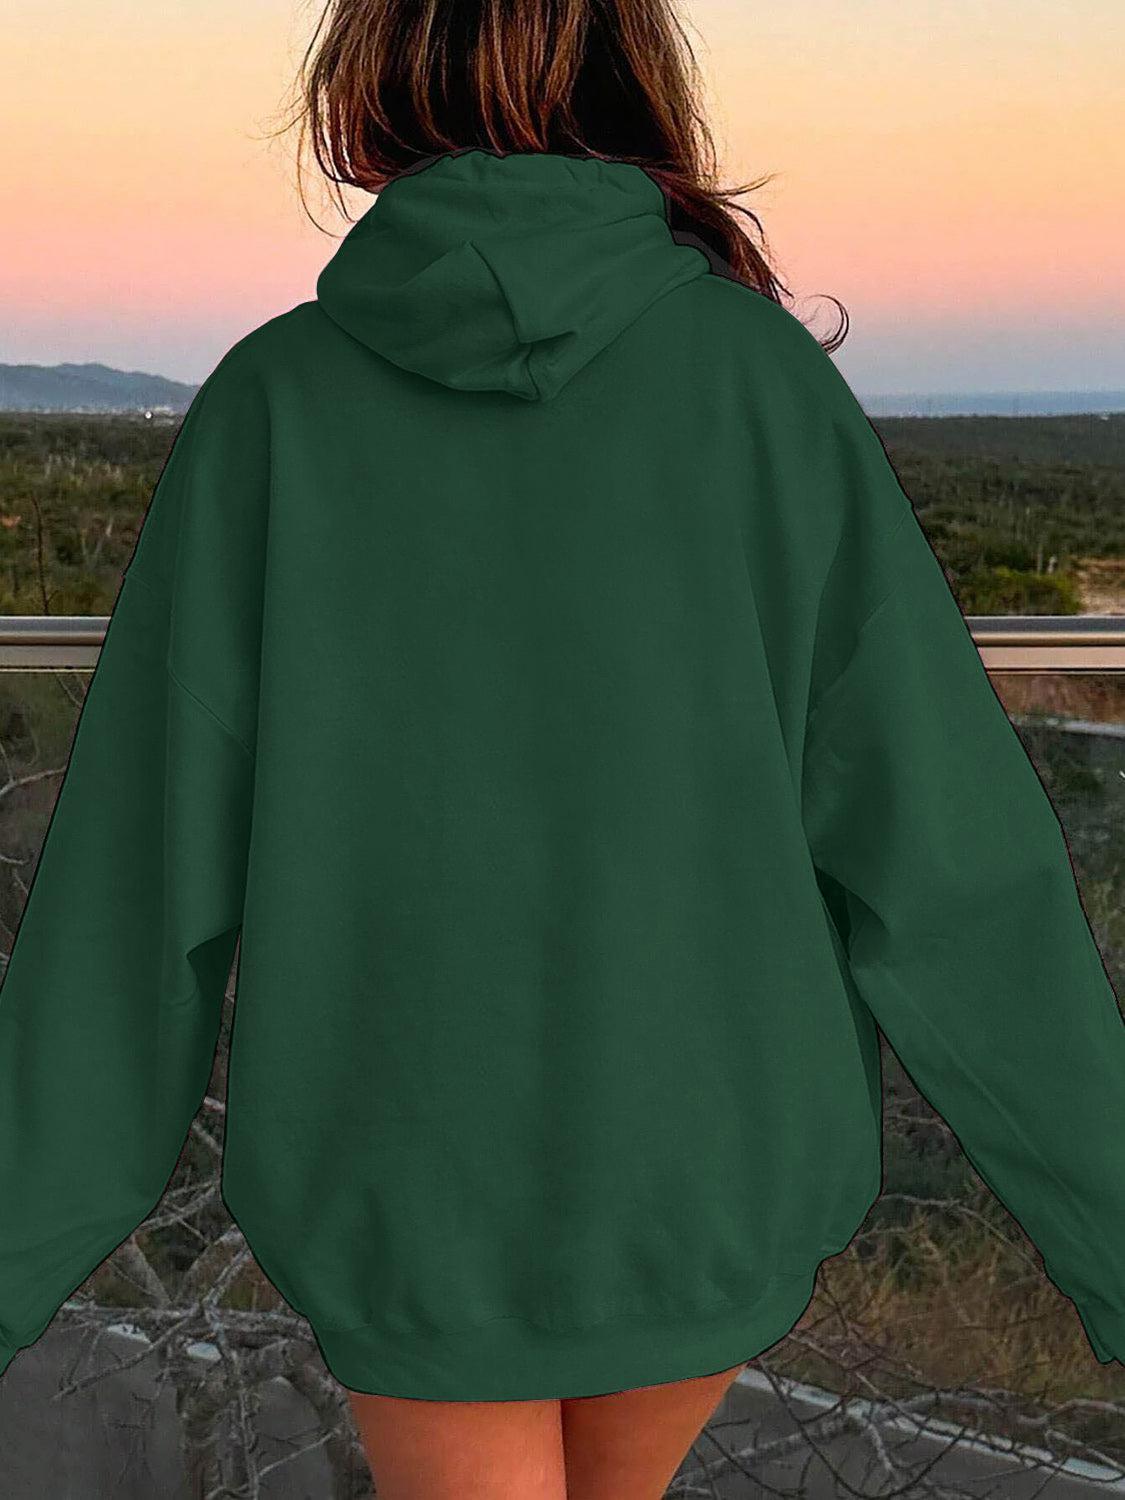 a woman in a green hoodie looking at the sunset